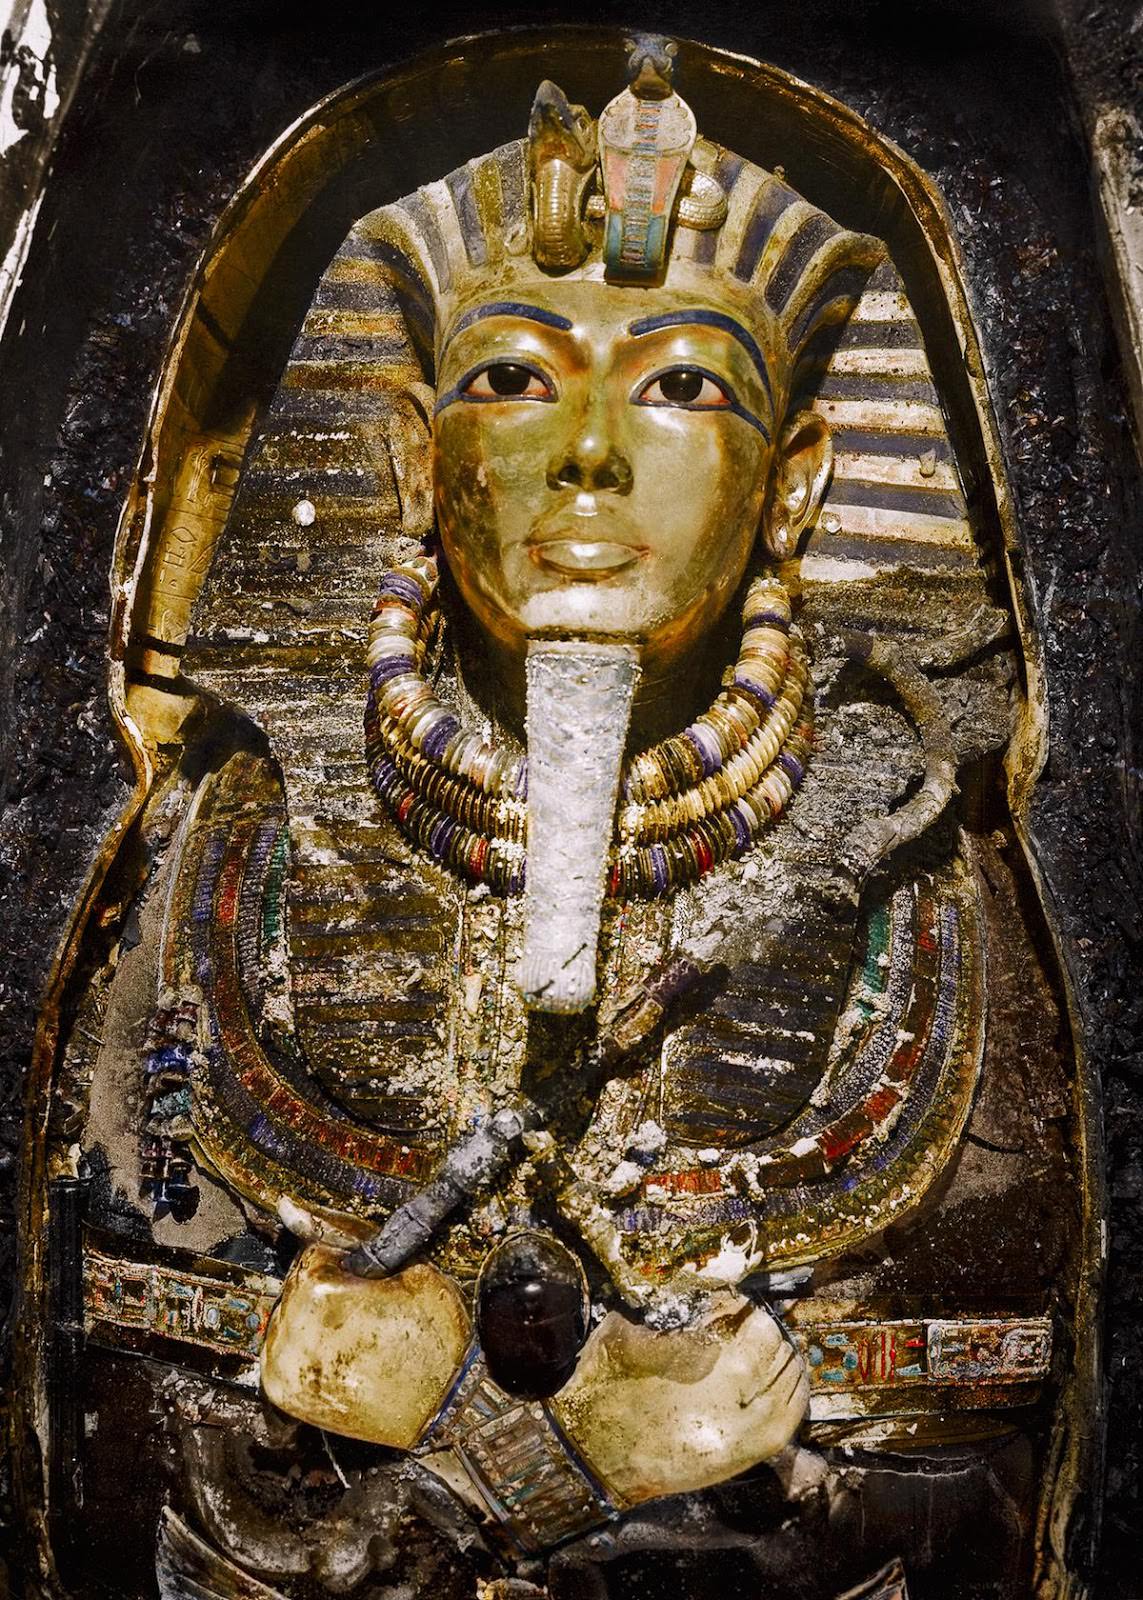 The gold mask (Carter no. 256a) in situ on the mummy of the King, still inside the third (innermost) solid gold coffin (Carter no. 255). Tutankhamun's Tomb, 30th October 1925